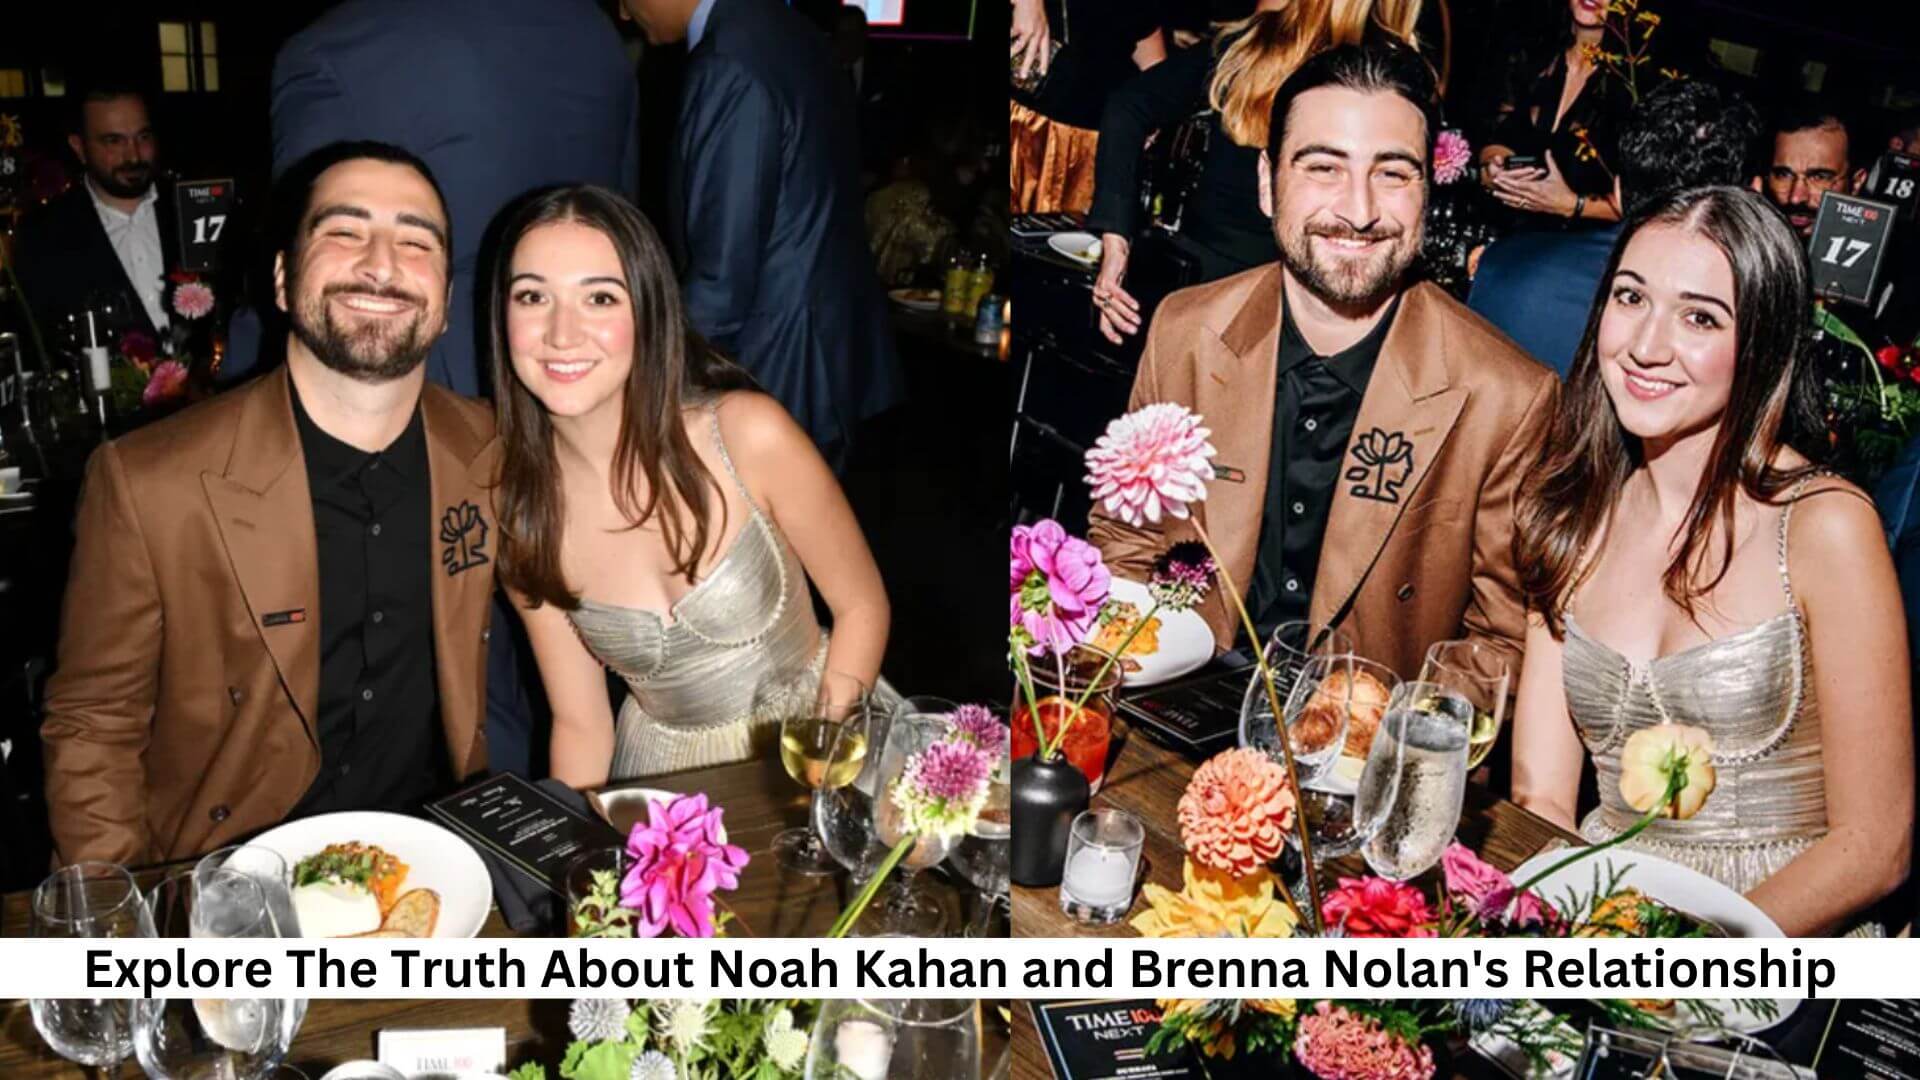 Explore The Truth About Noah Kahan and Brenna Nolan's Relationship